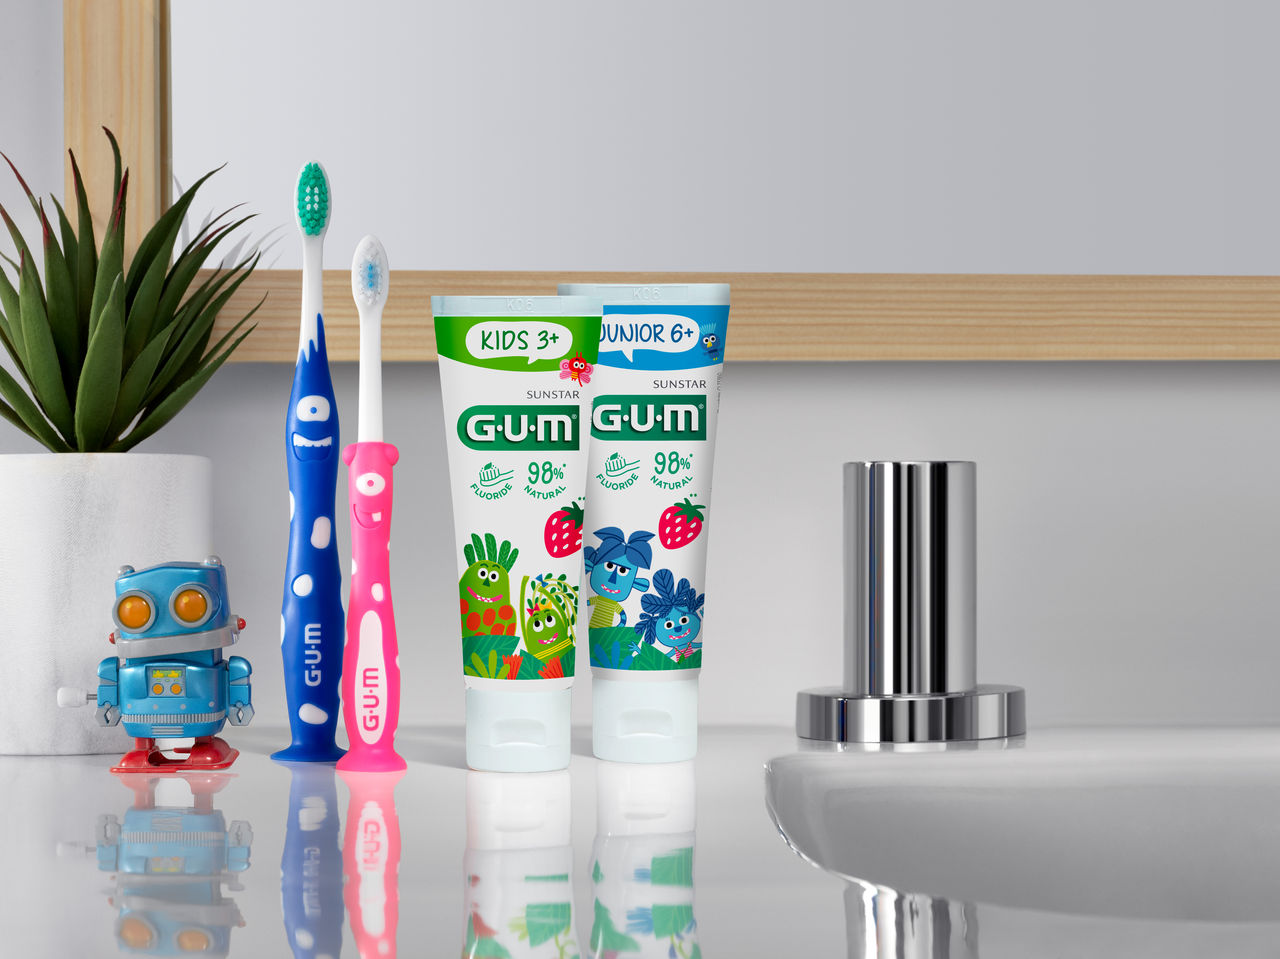 GUM KIDS and JUNIOR toothpastes and toothbrushes